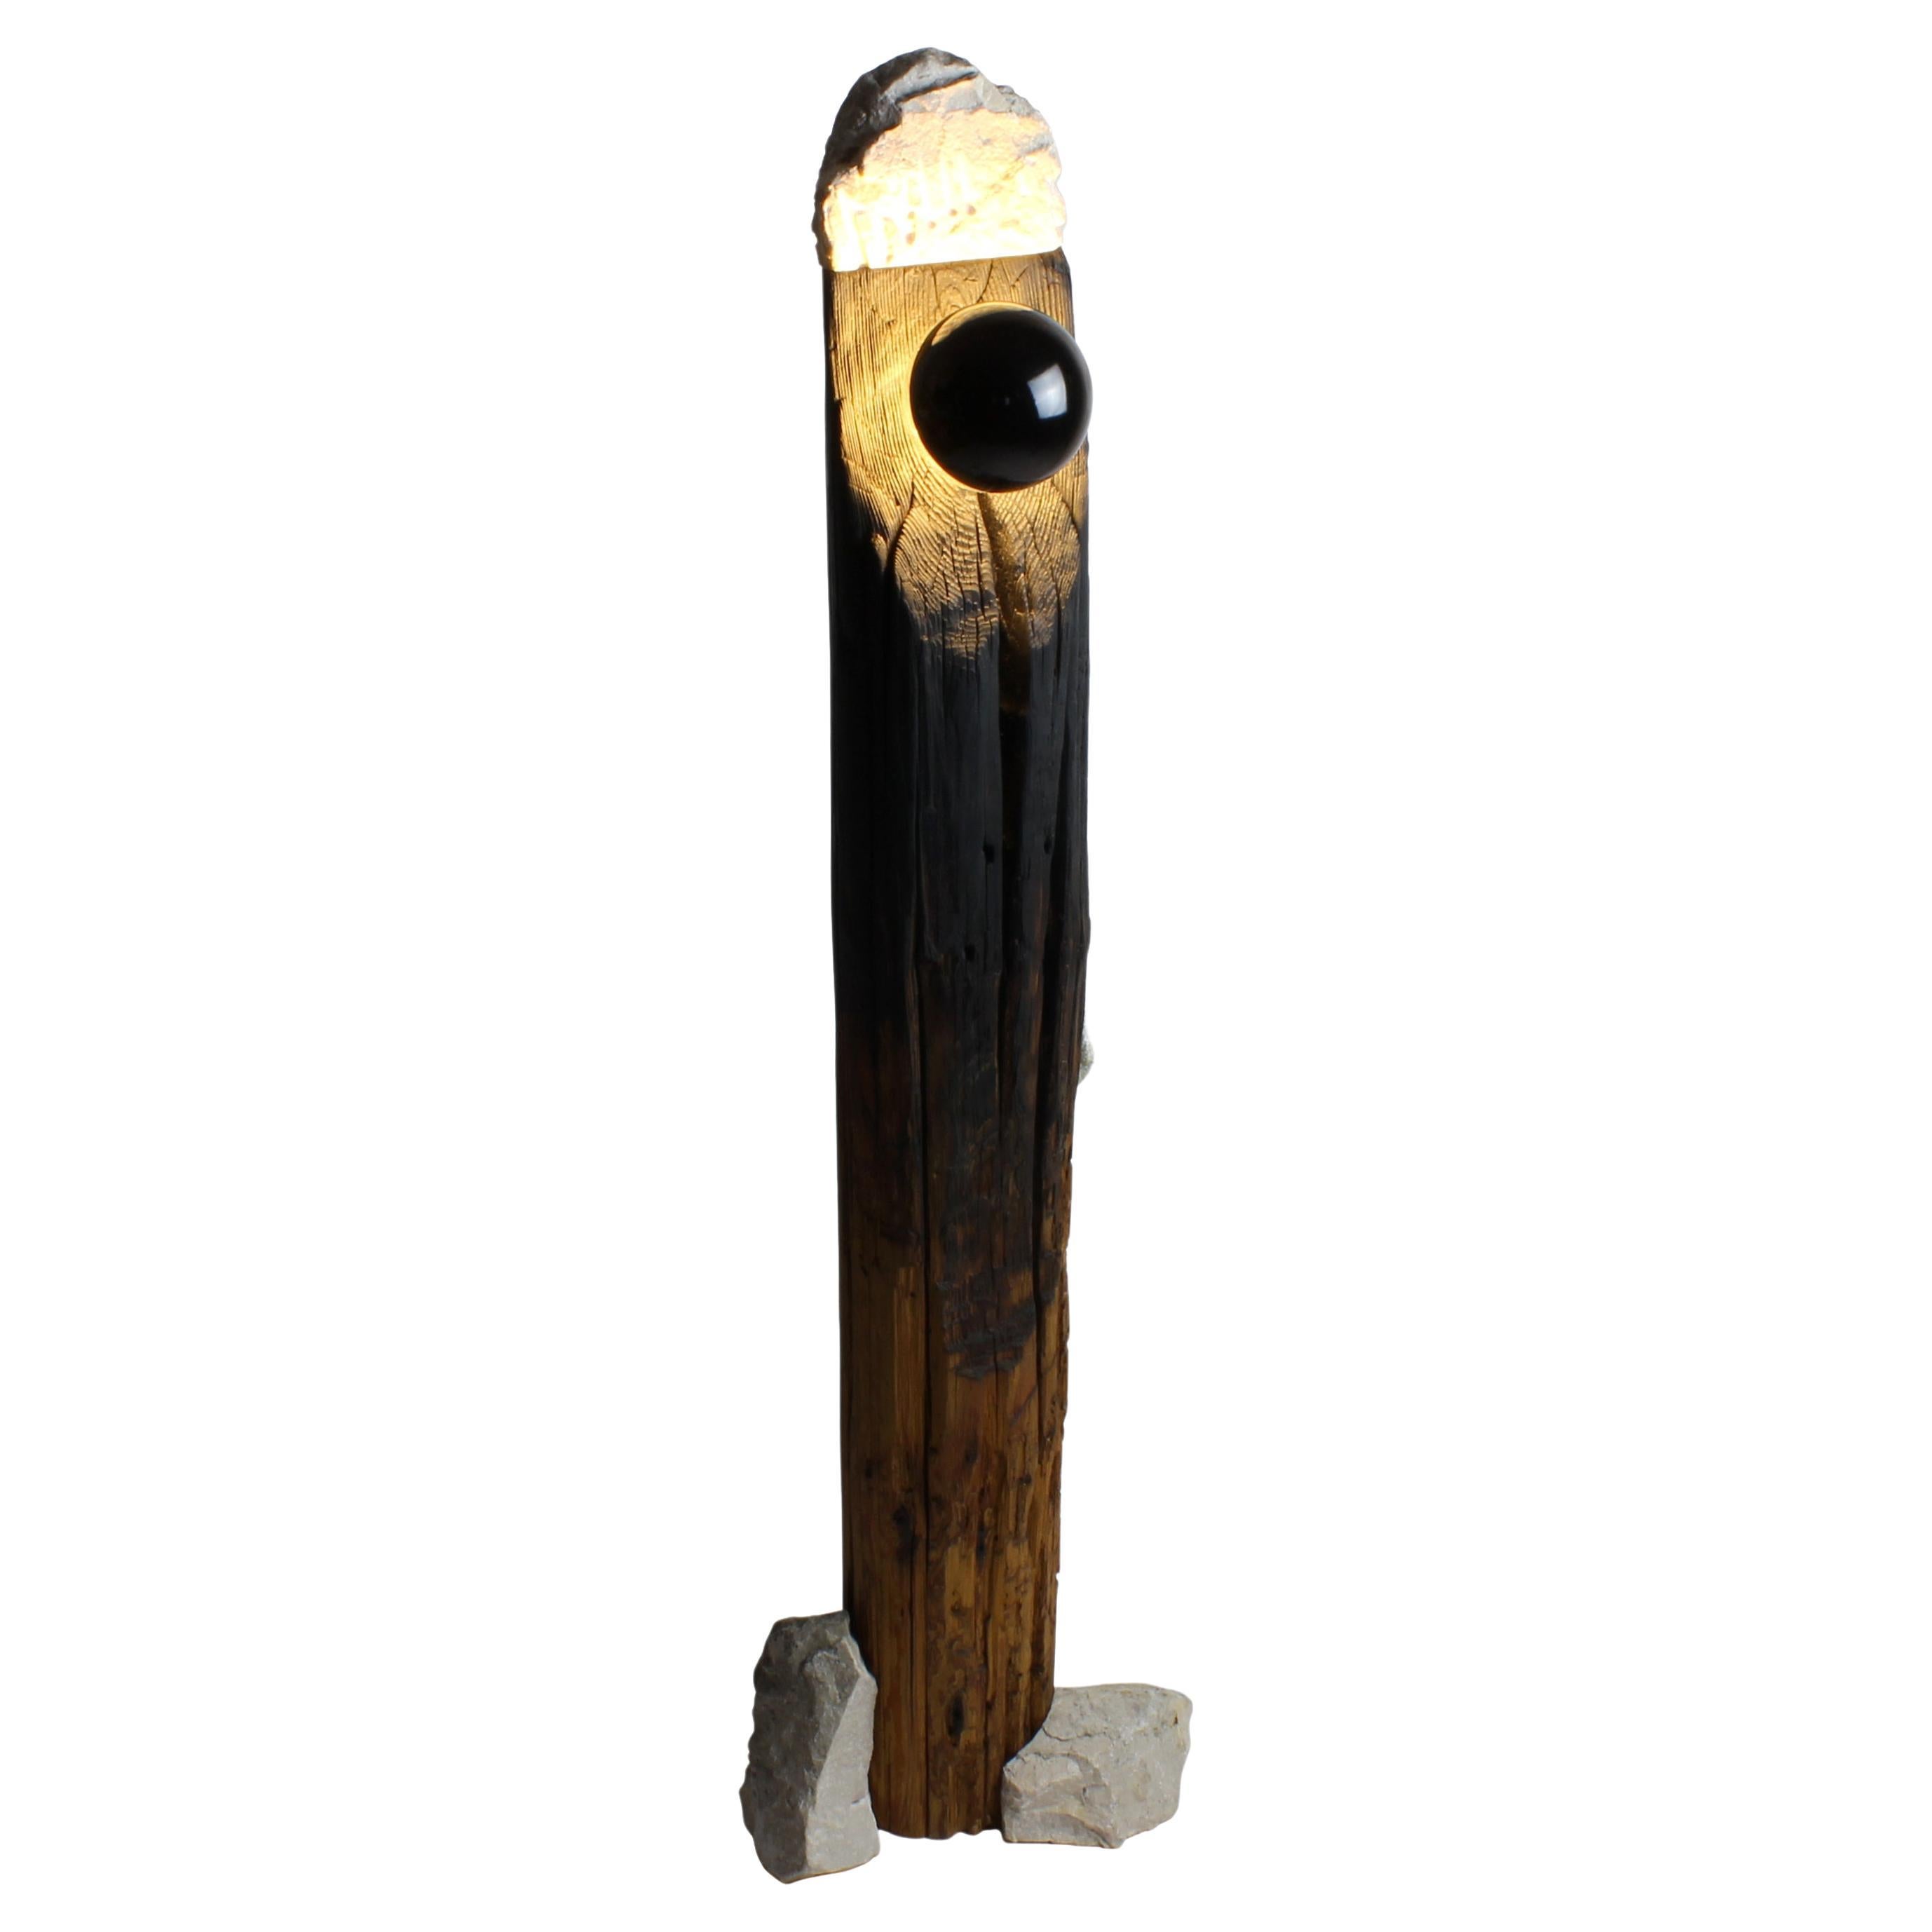 Totem - Sculptural Lighting, Floor Lamp from Reclaimed Burned Wood and Stone